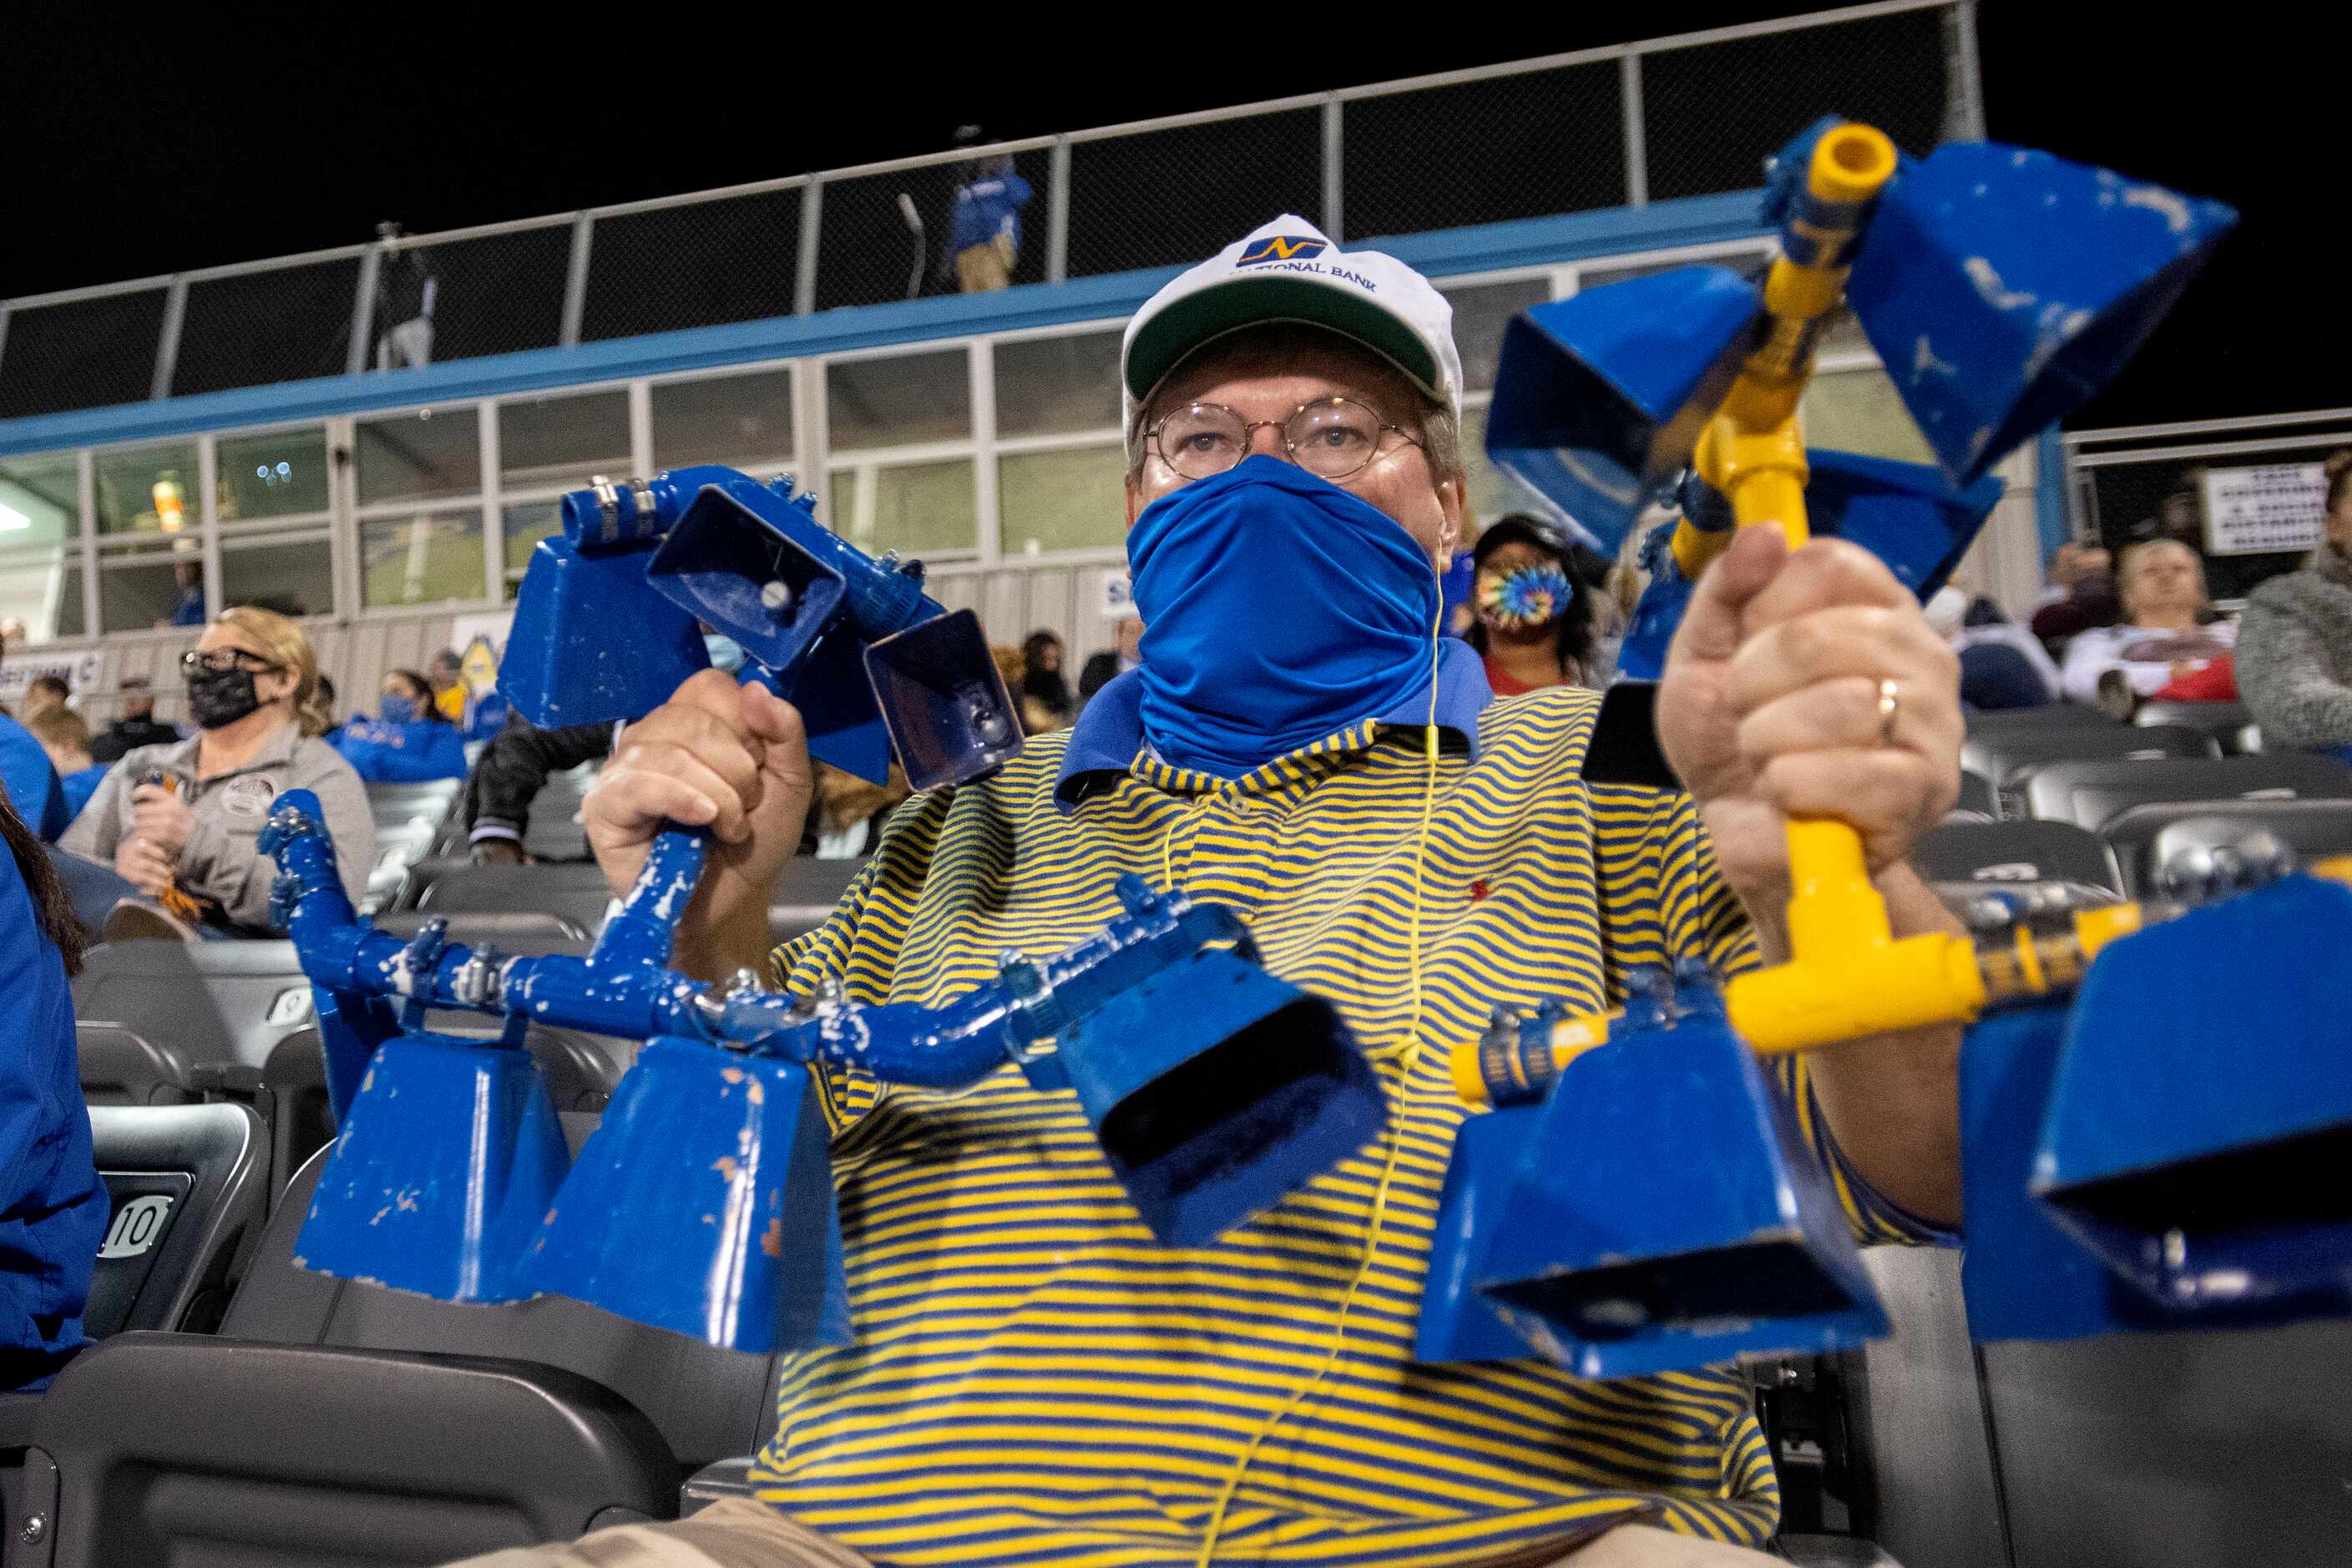 Sunnyvale fan and school board member Michael Threet uses a homemade cowbell contraption to...